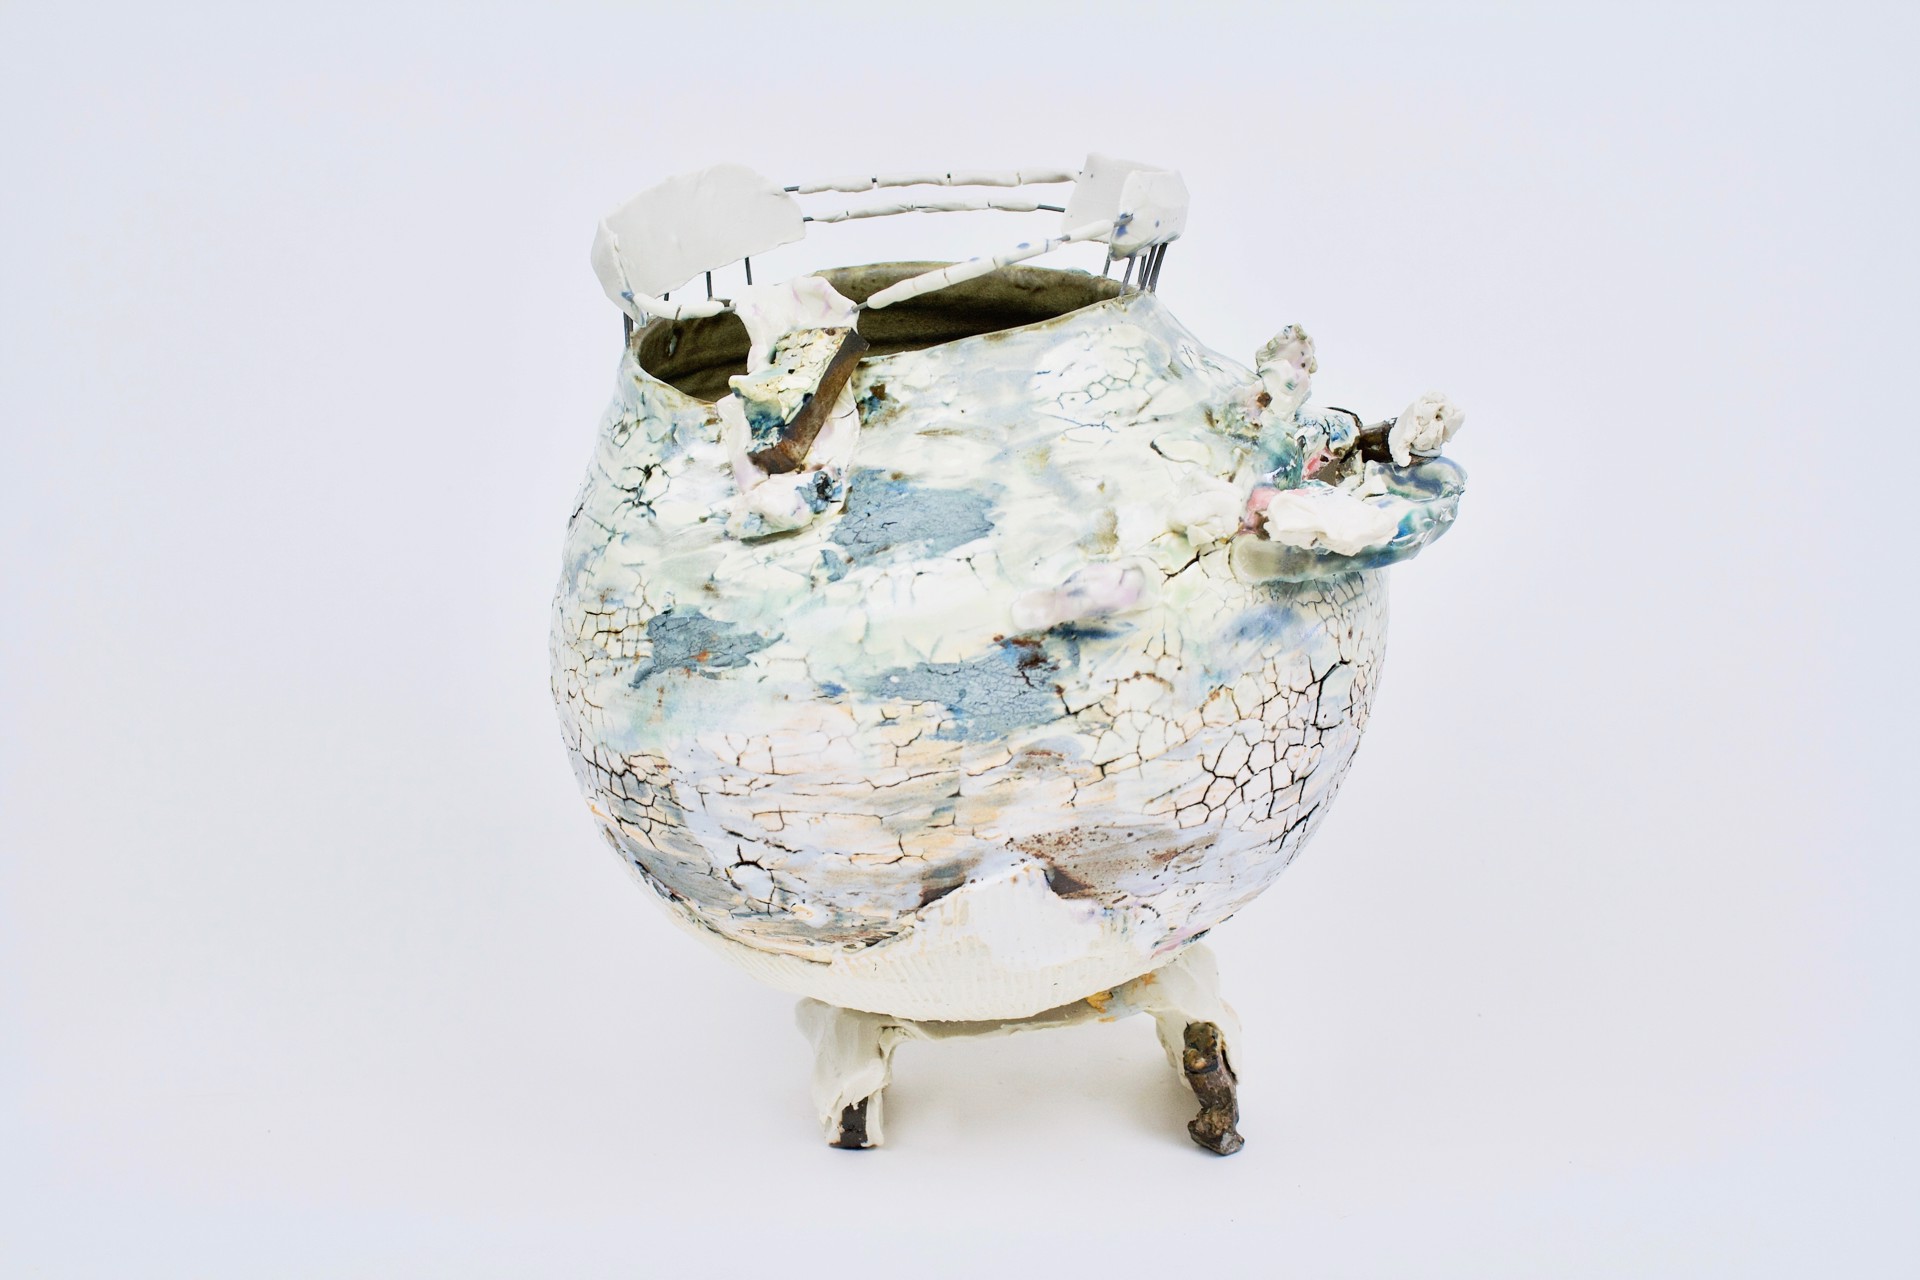 Earthly Creature with Porcelain Pedestal Foot by Ani Kasten